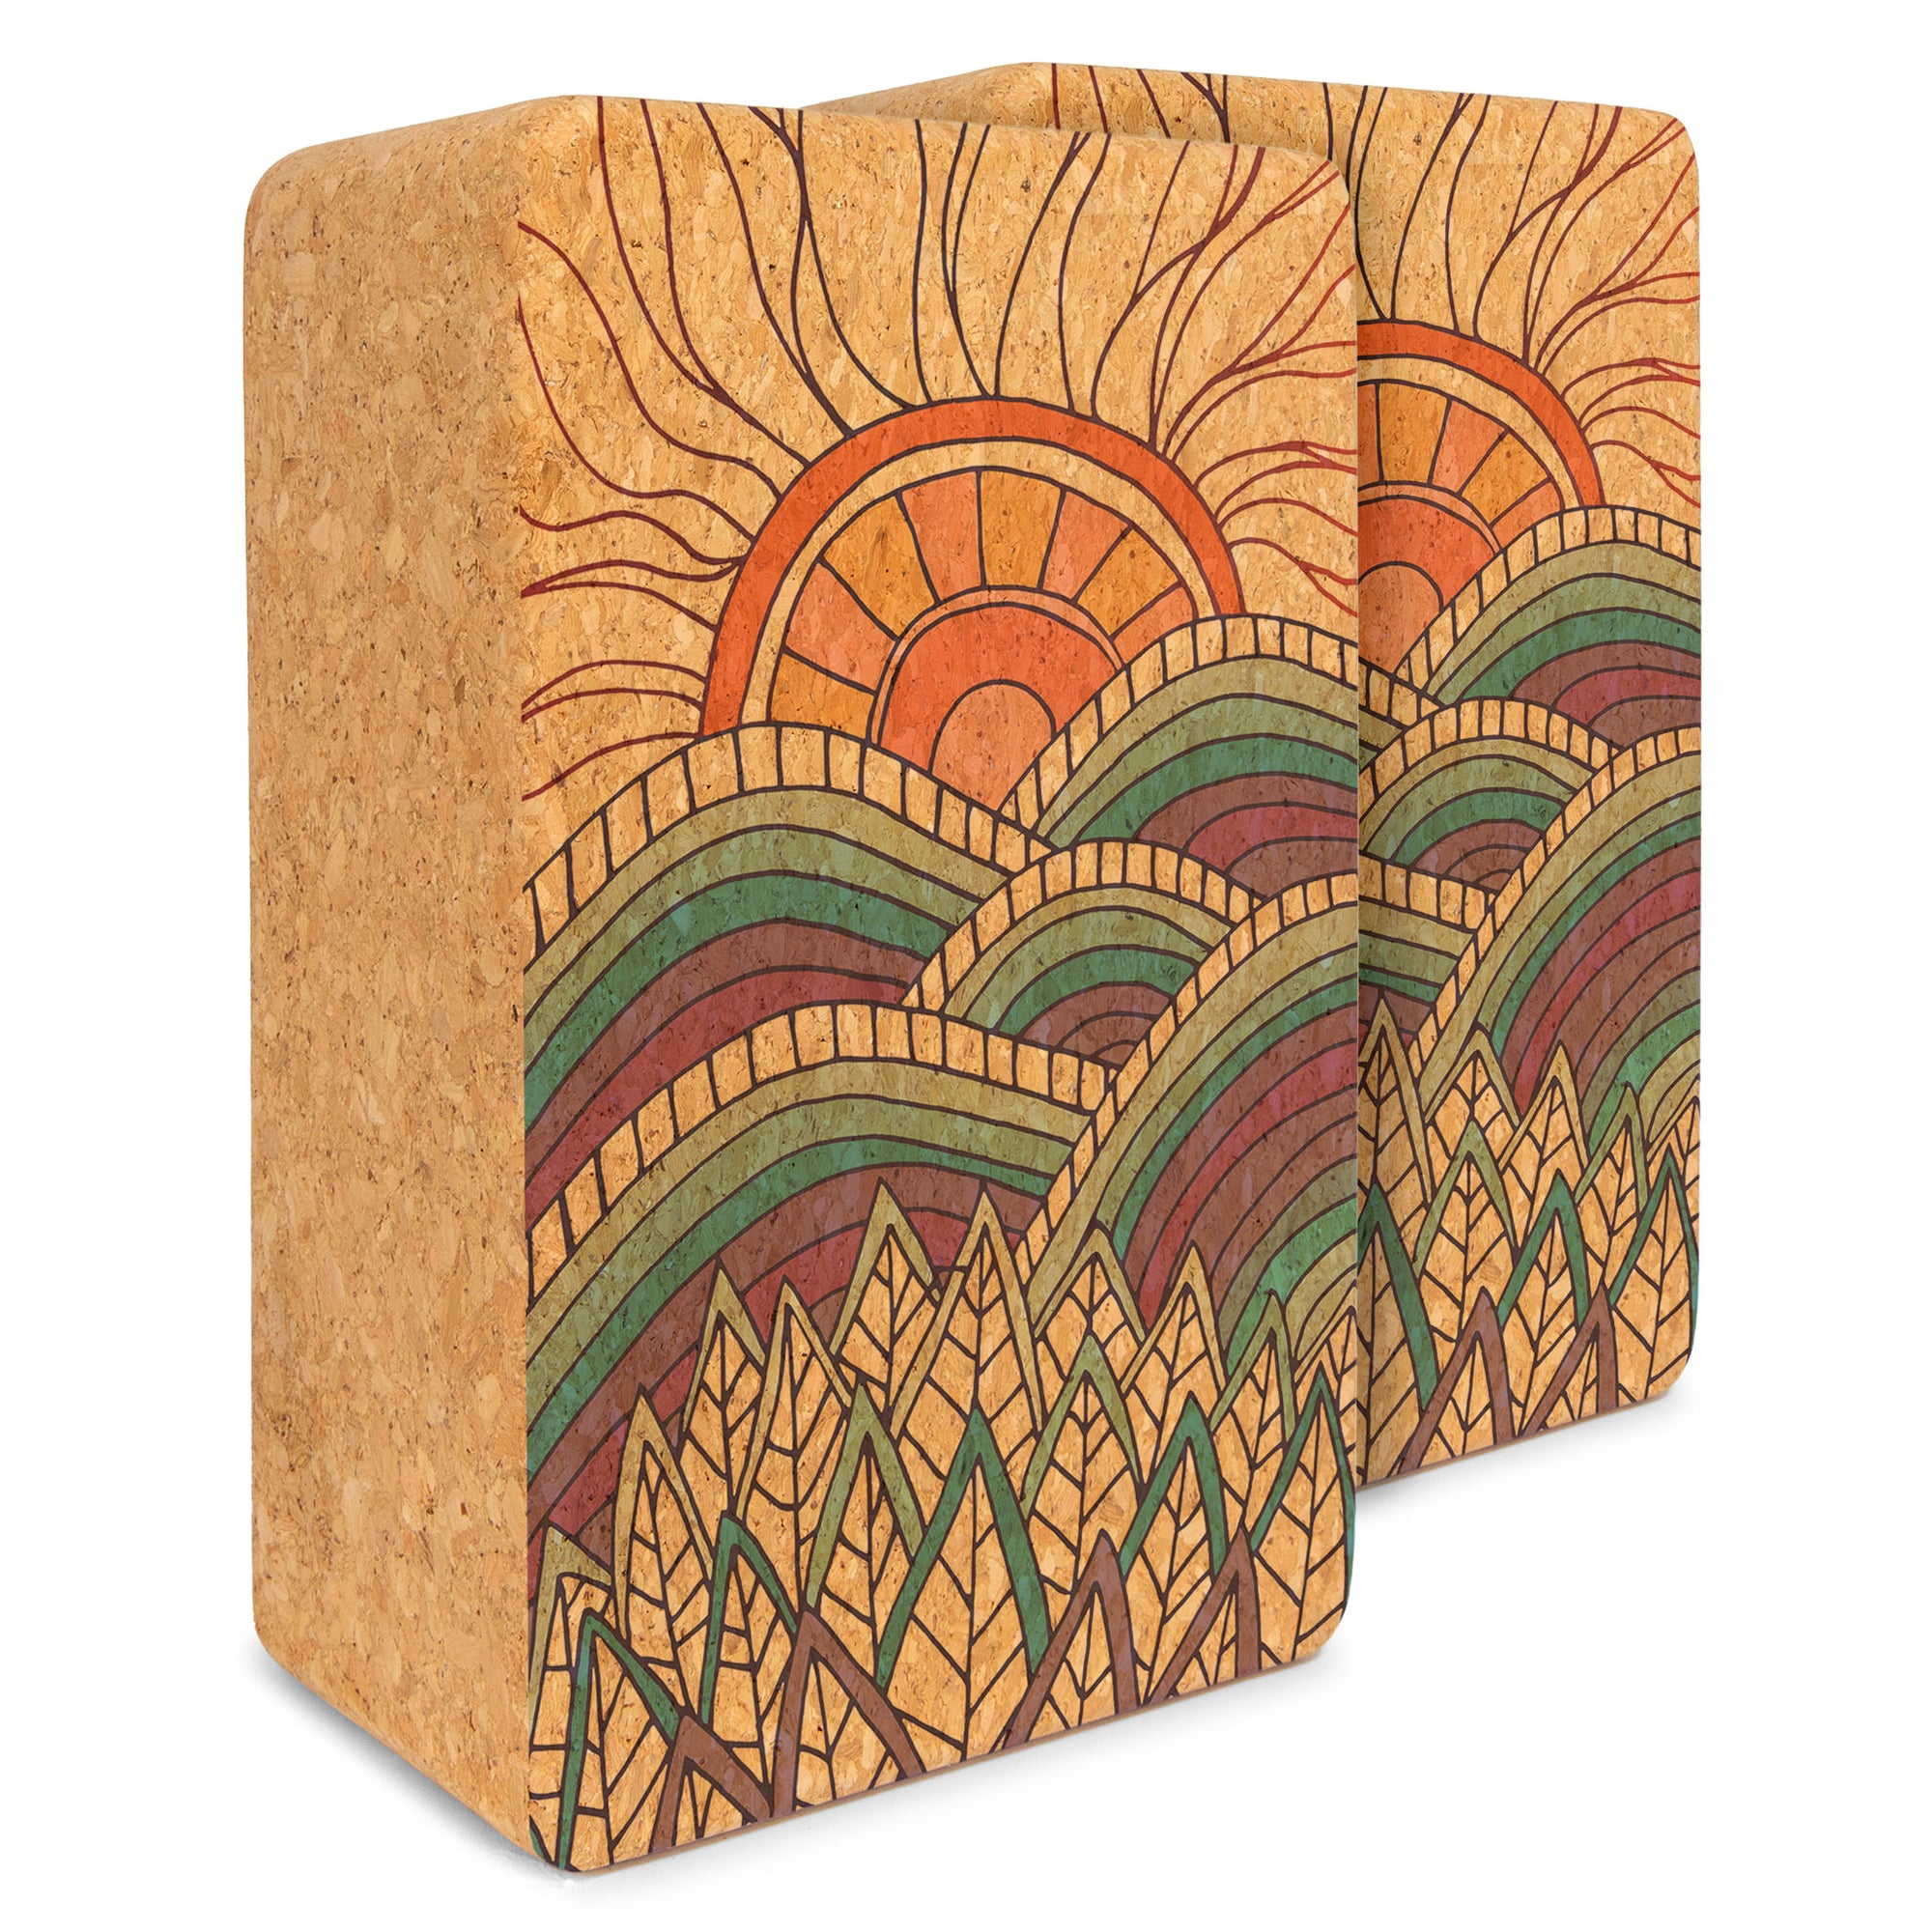 Cork Yoga Block by Ananday - Reprise Activewear